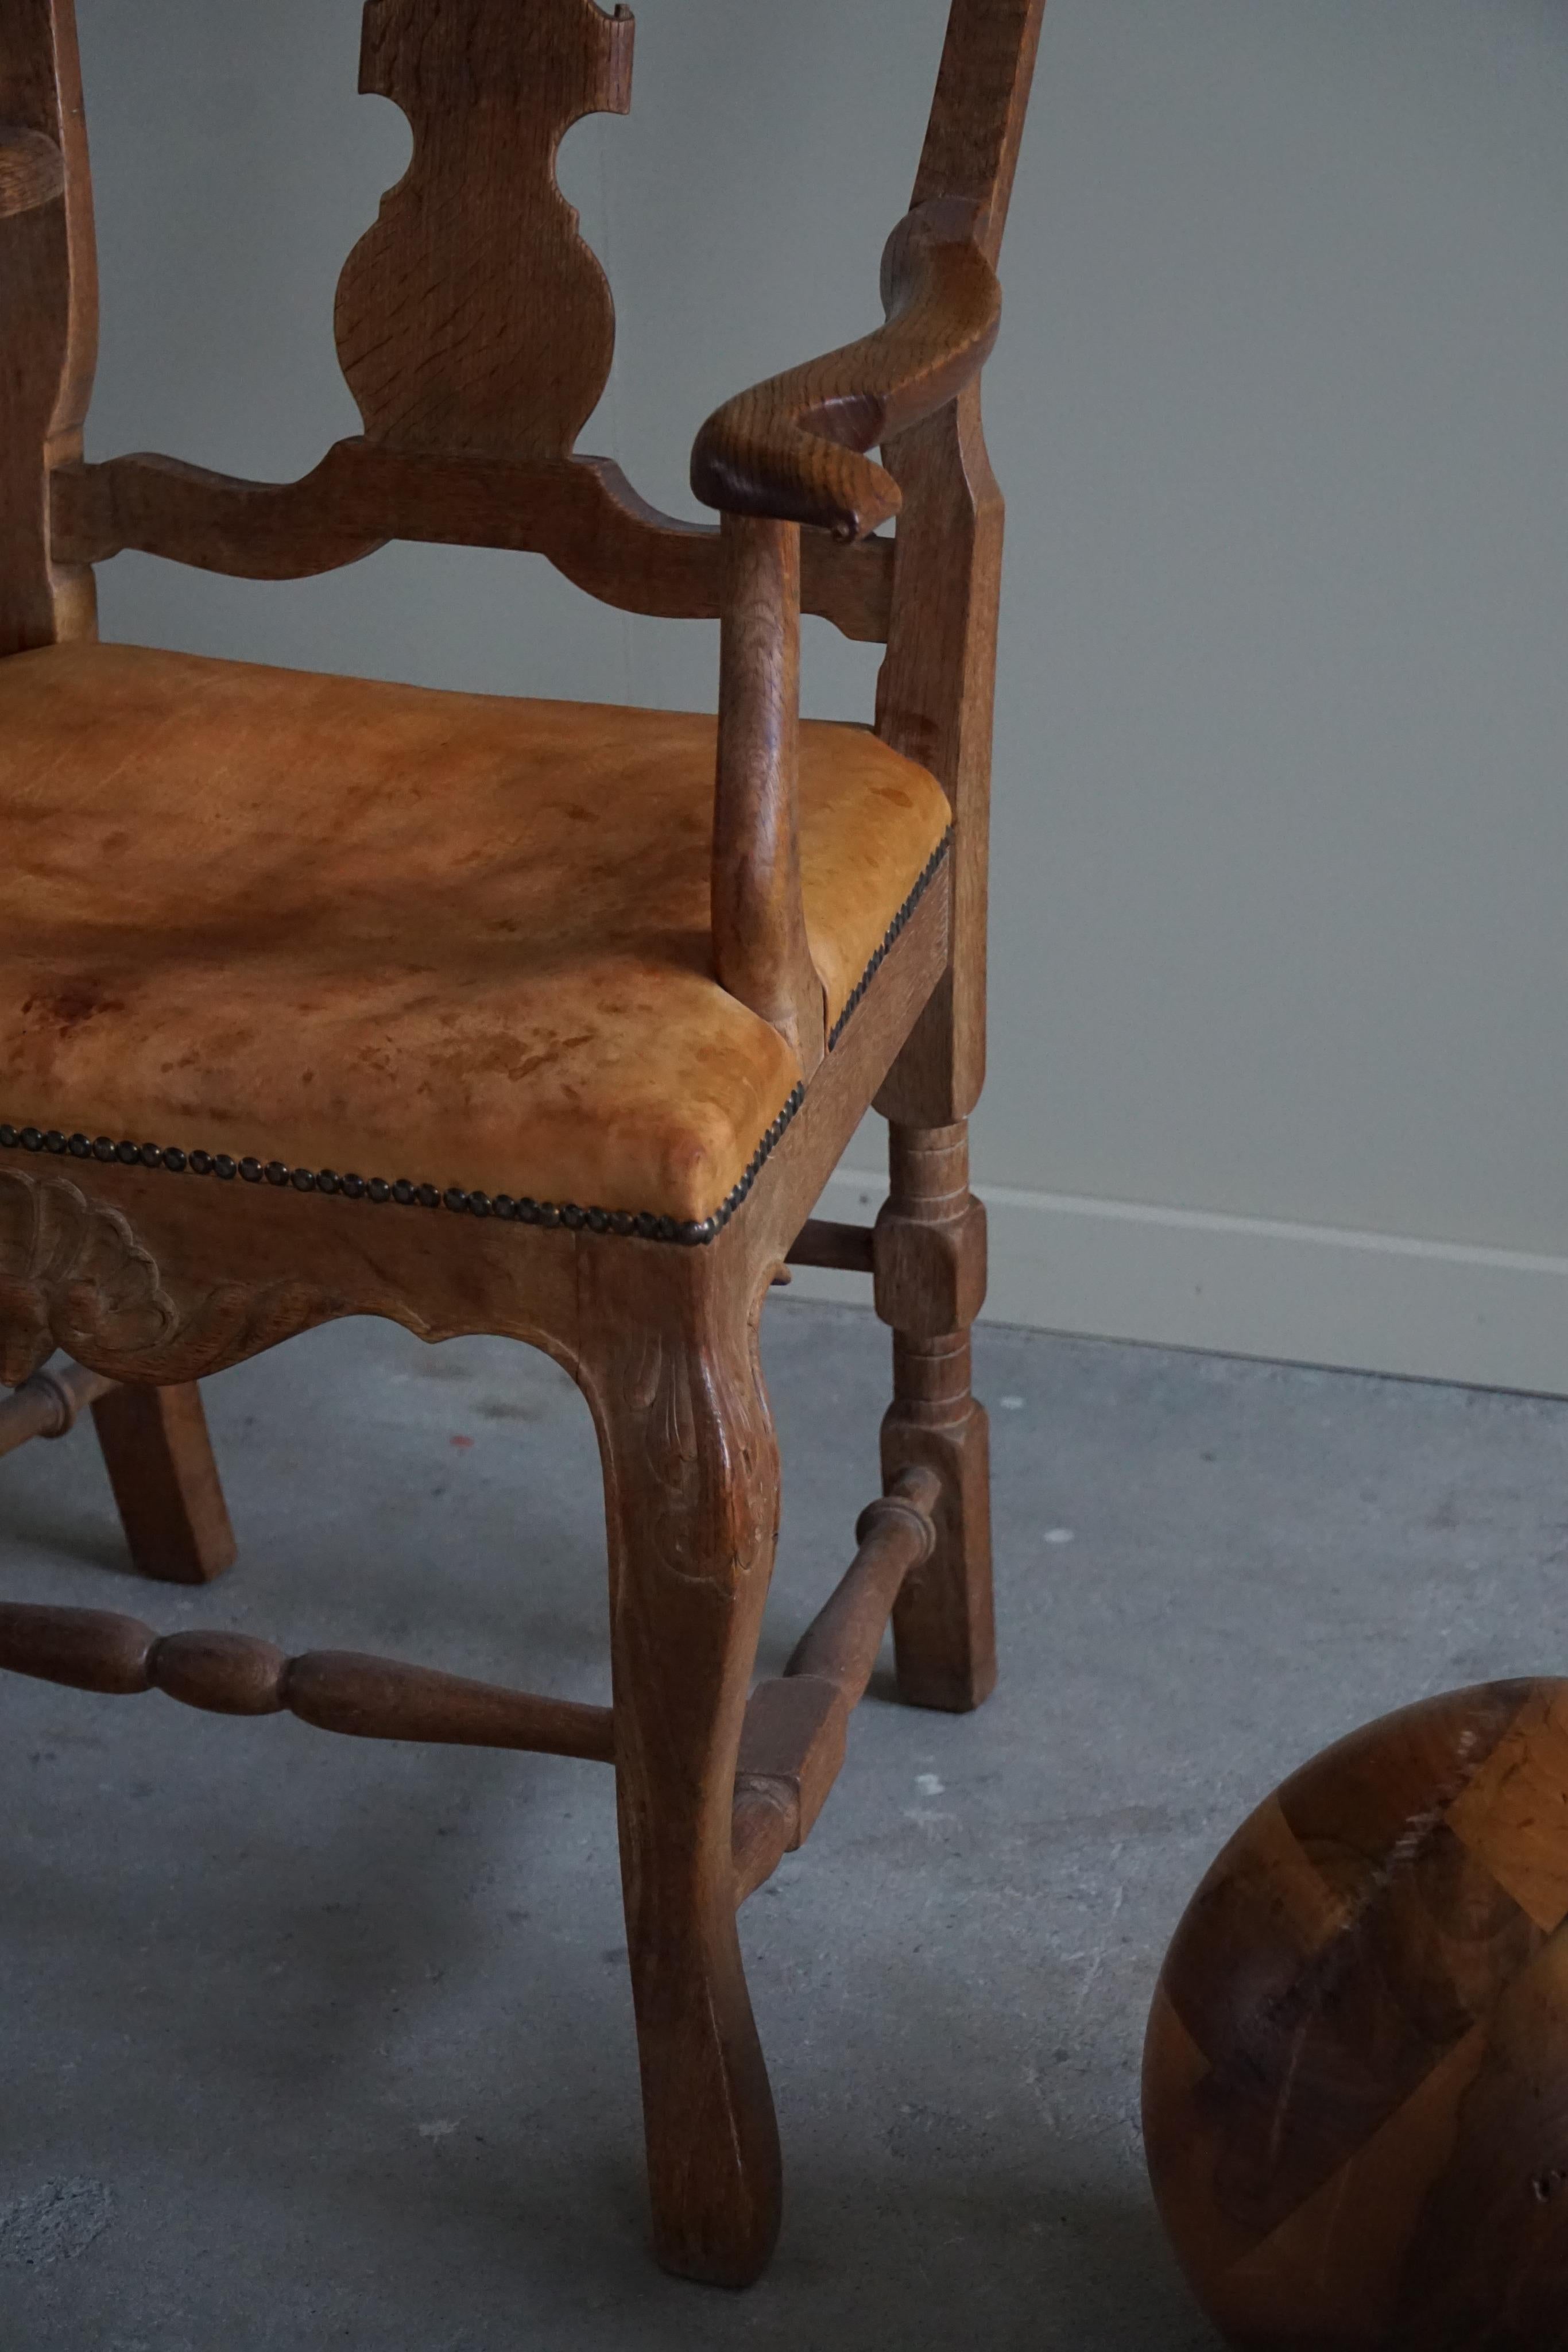 Hand-Crafted  Sculptural Vintage Armchair in Oak and Leather, Danish Modern, 1940s For Sale